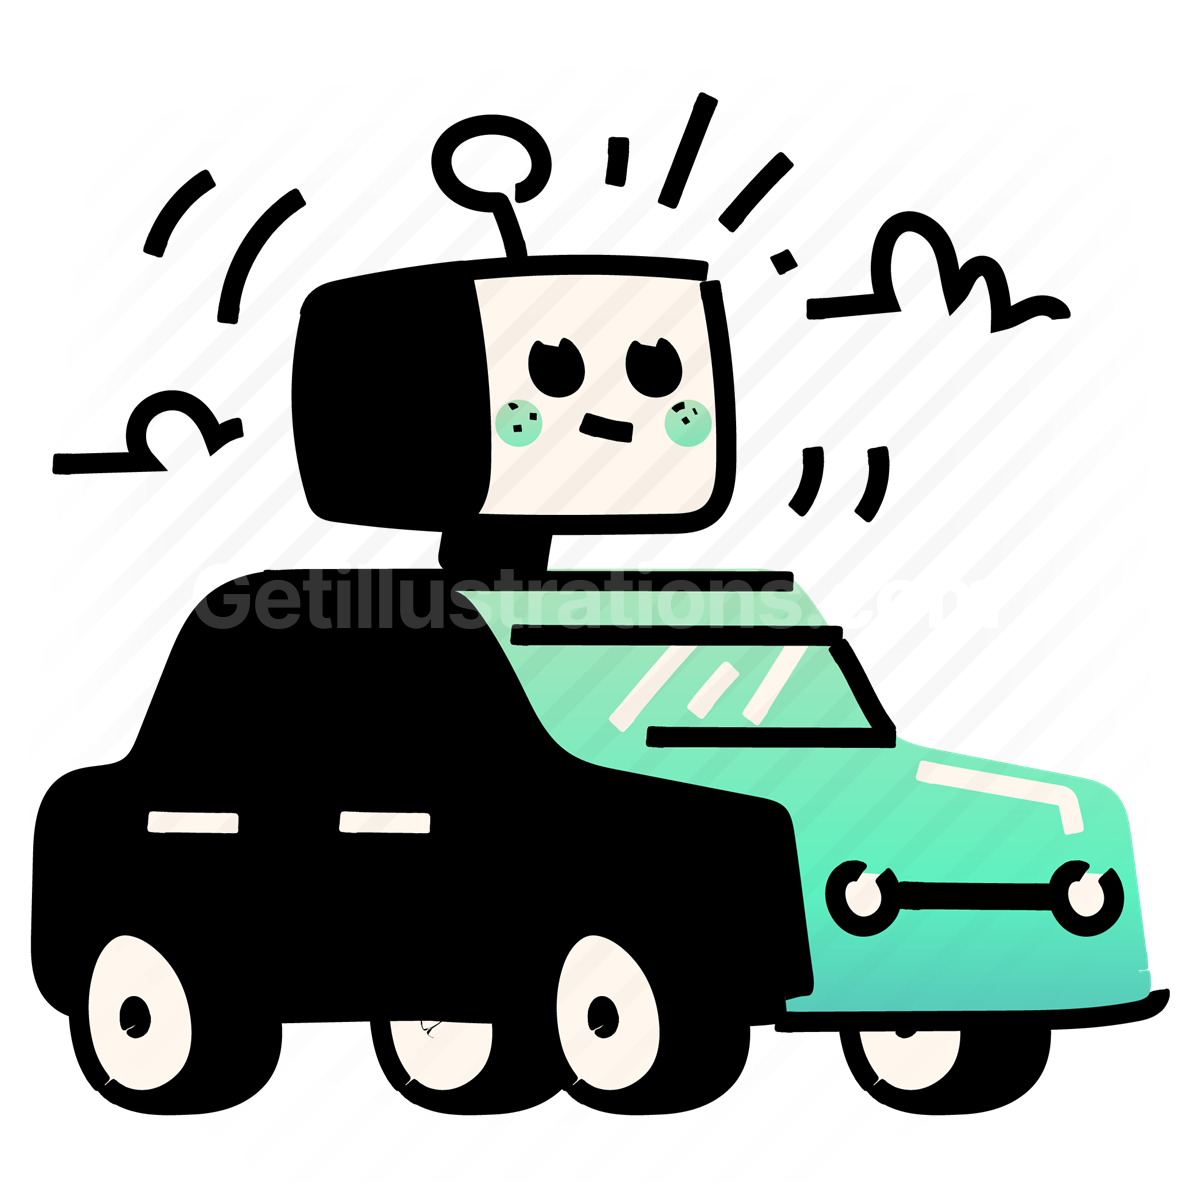 drive, traffic, automation, robotic, robot, automatic, self driving